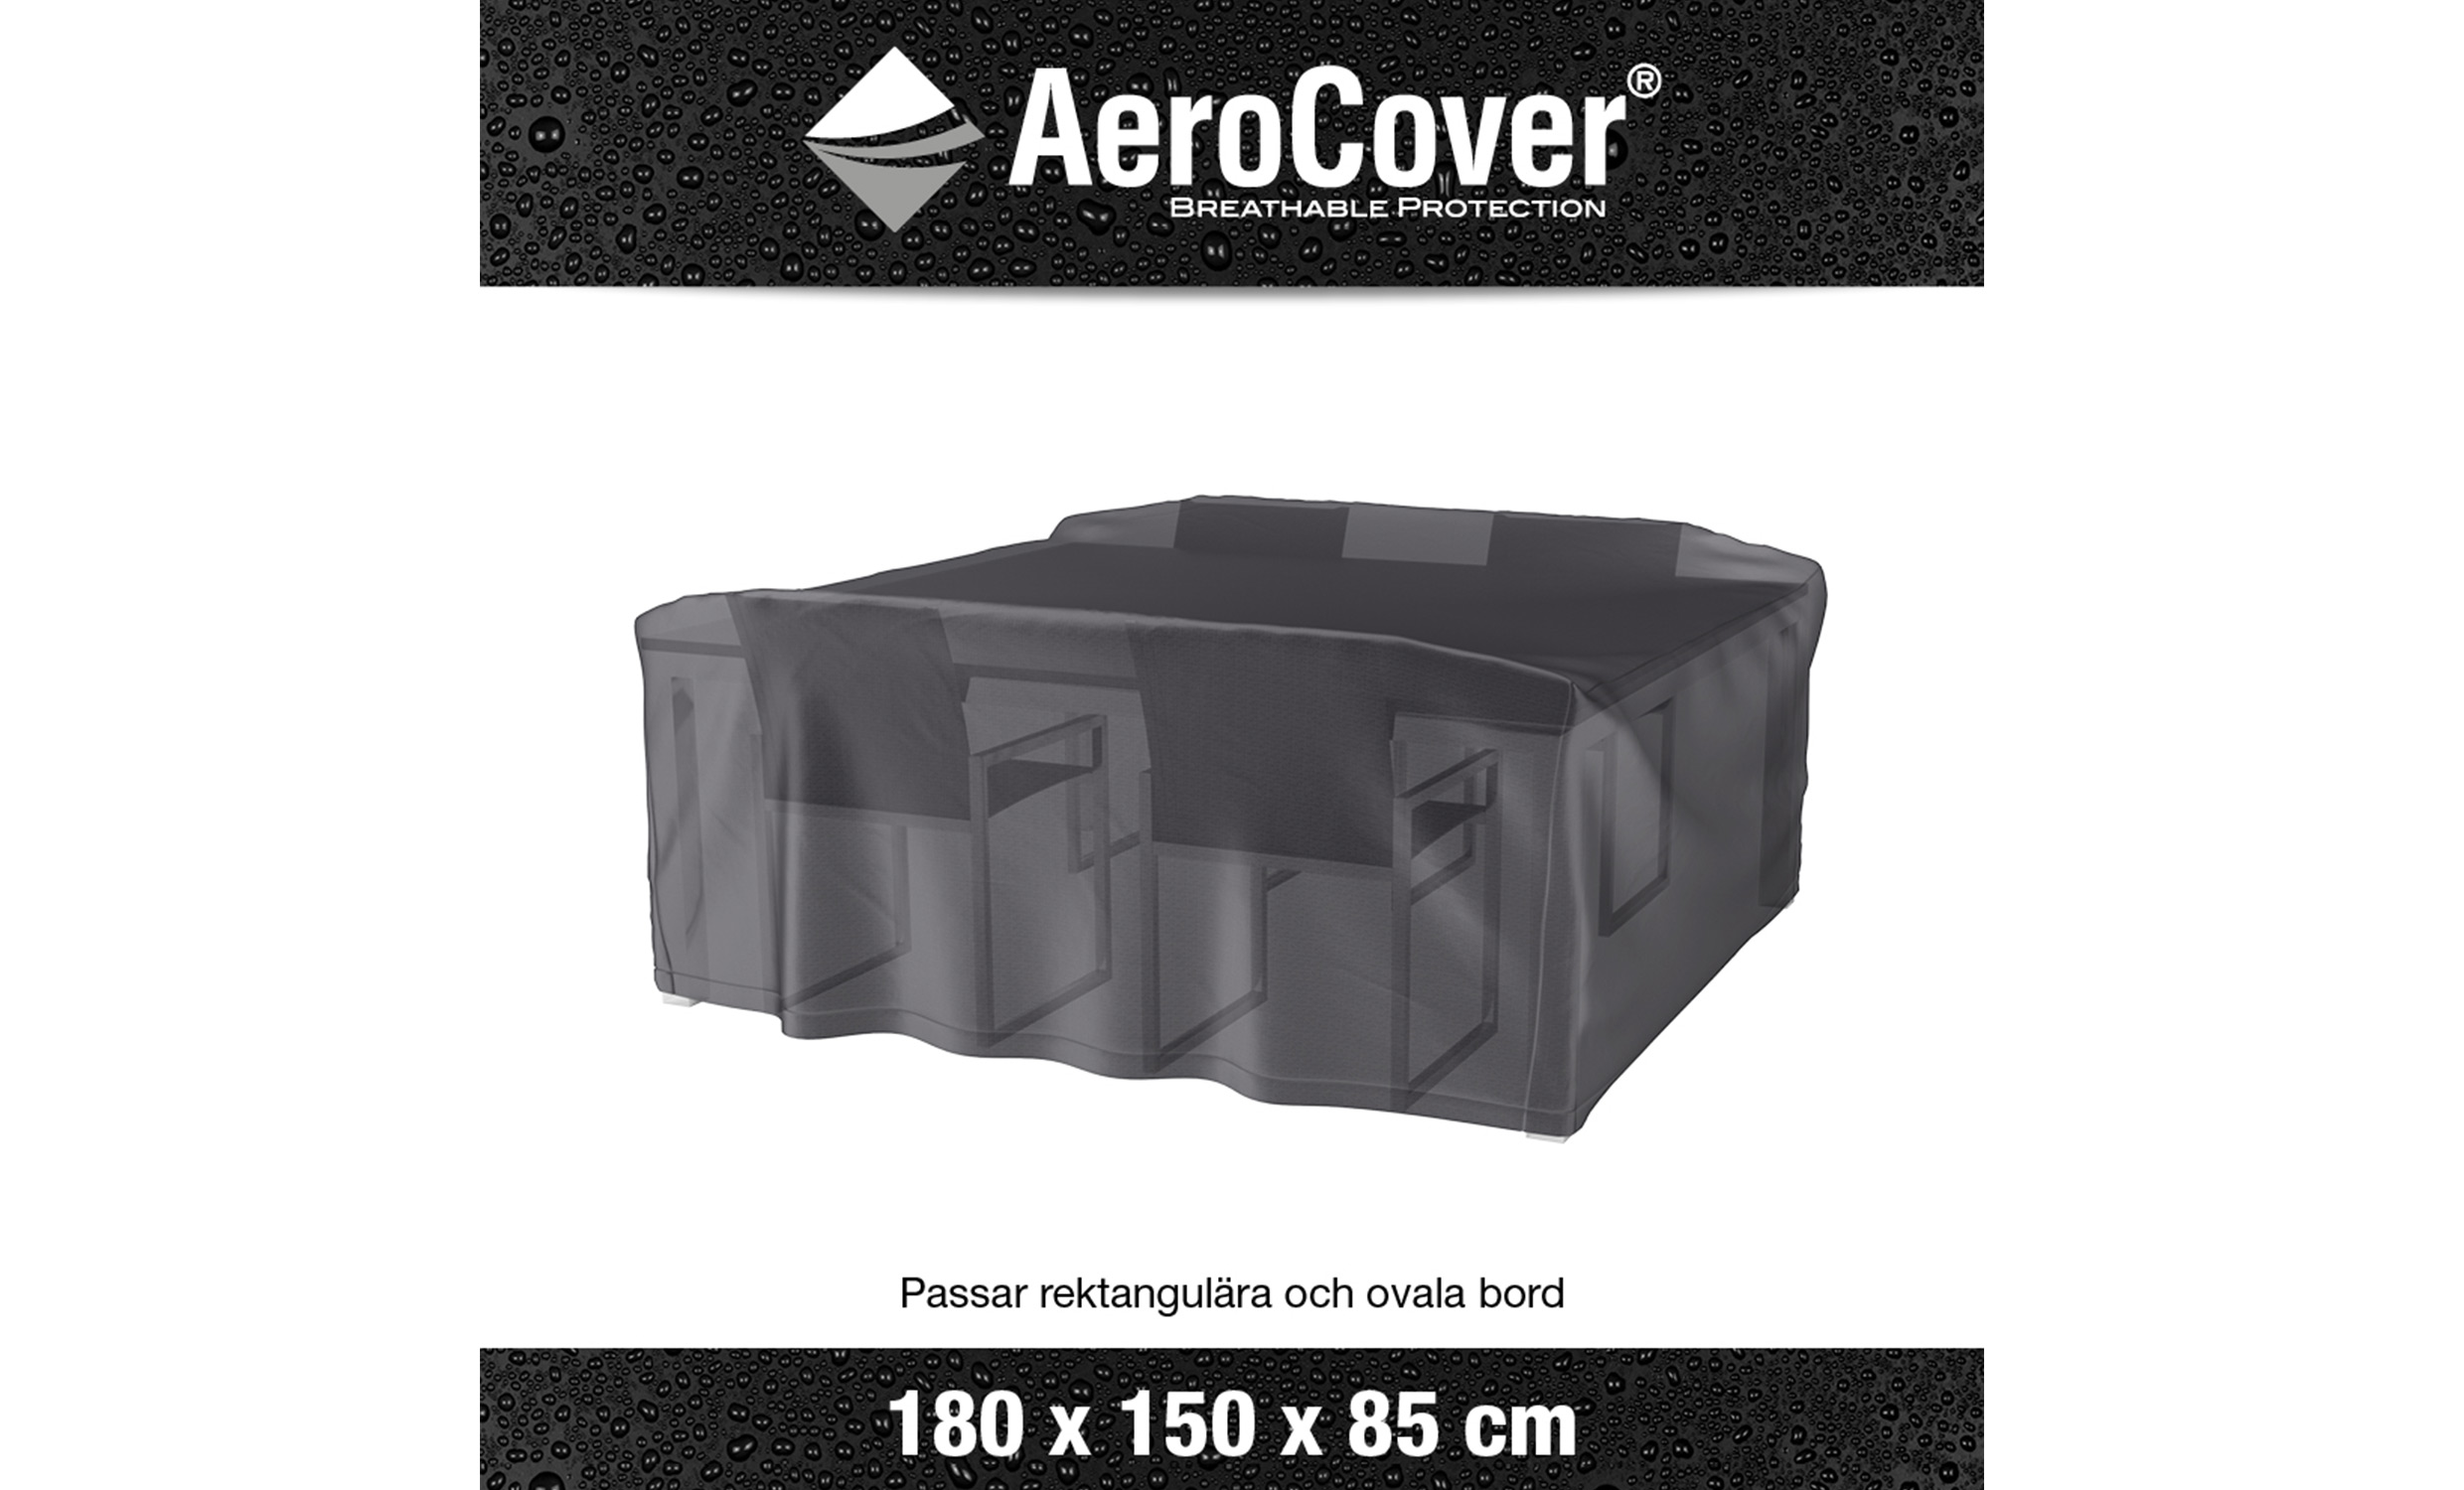 AEROCOVER Mbelskydd Antracit 180x150xH85